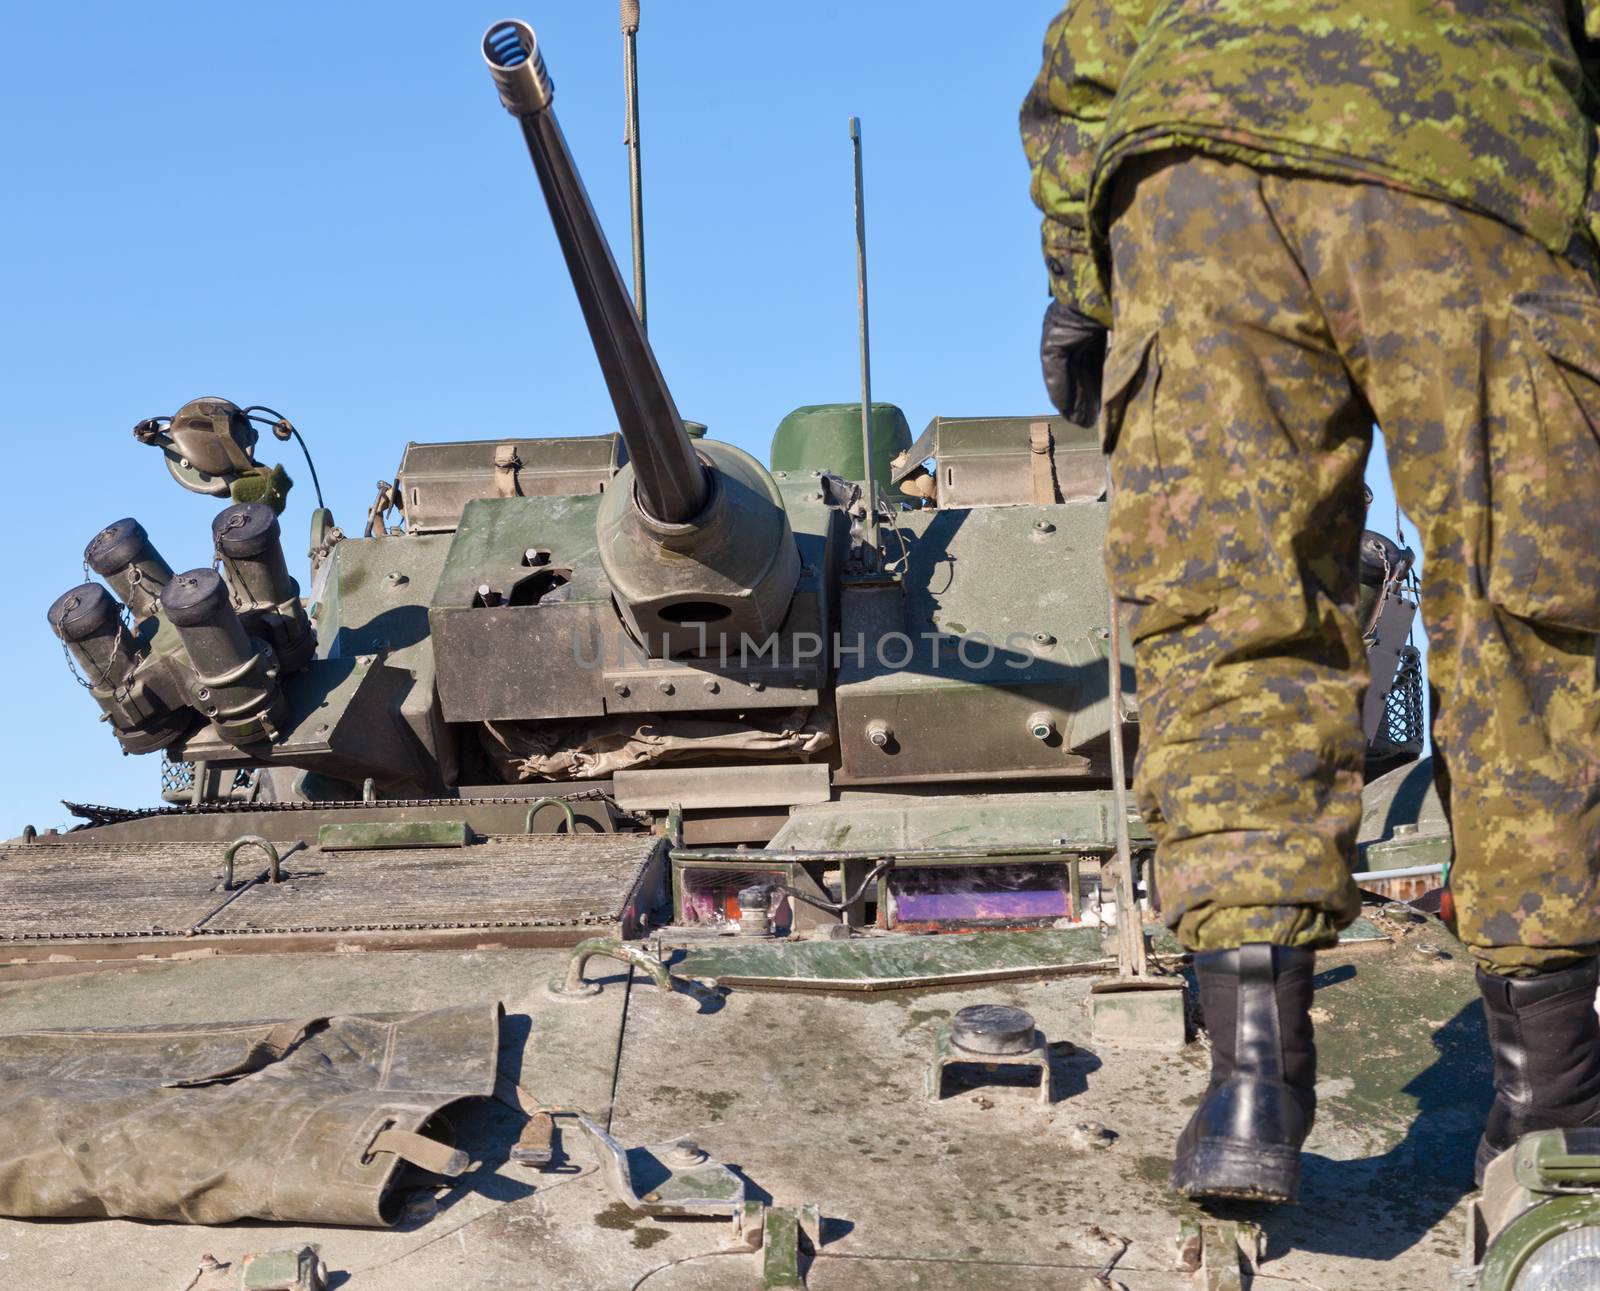 Soldier in combat uniform standing on operational military armored tank vehicle with turret, armaments and gun